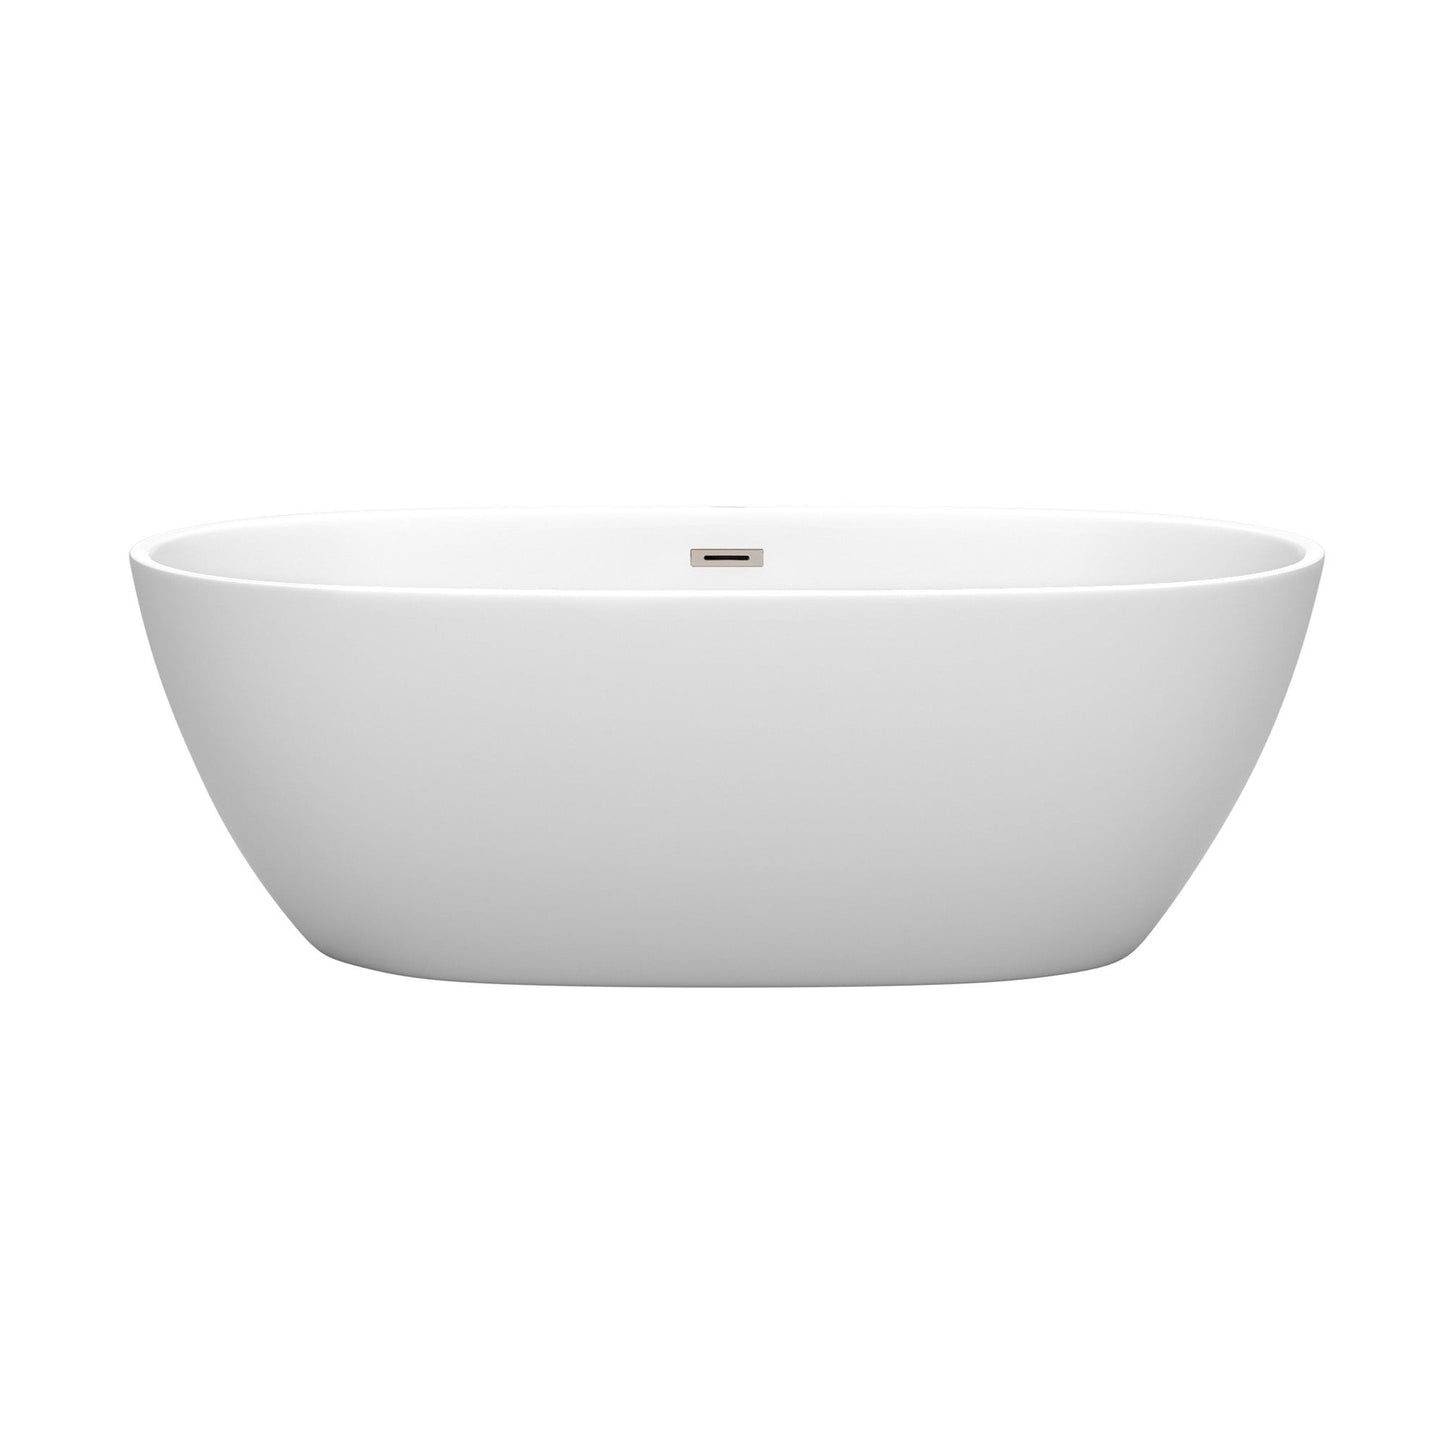 Wyndham Collection Juno 67" Freestanding Bathtub in Matte White With Brushed Nickel Drain and Overflow Trim